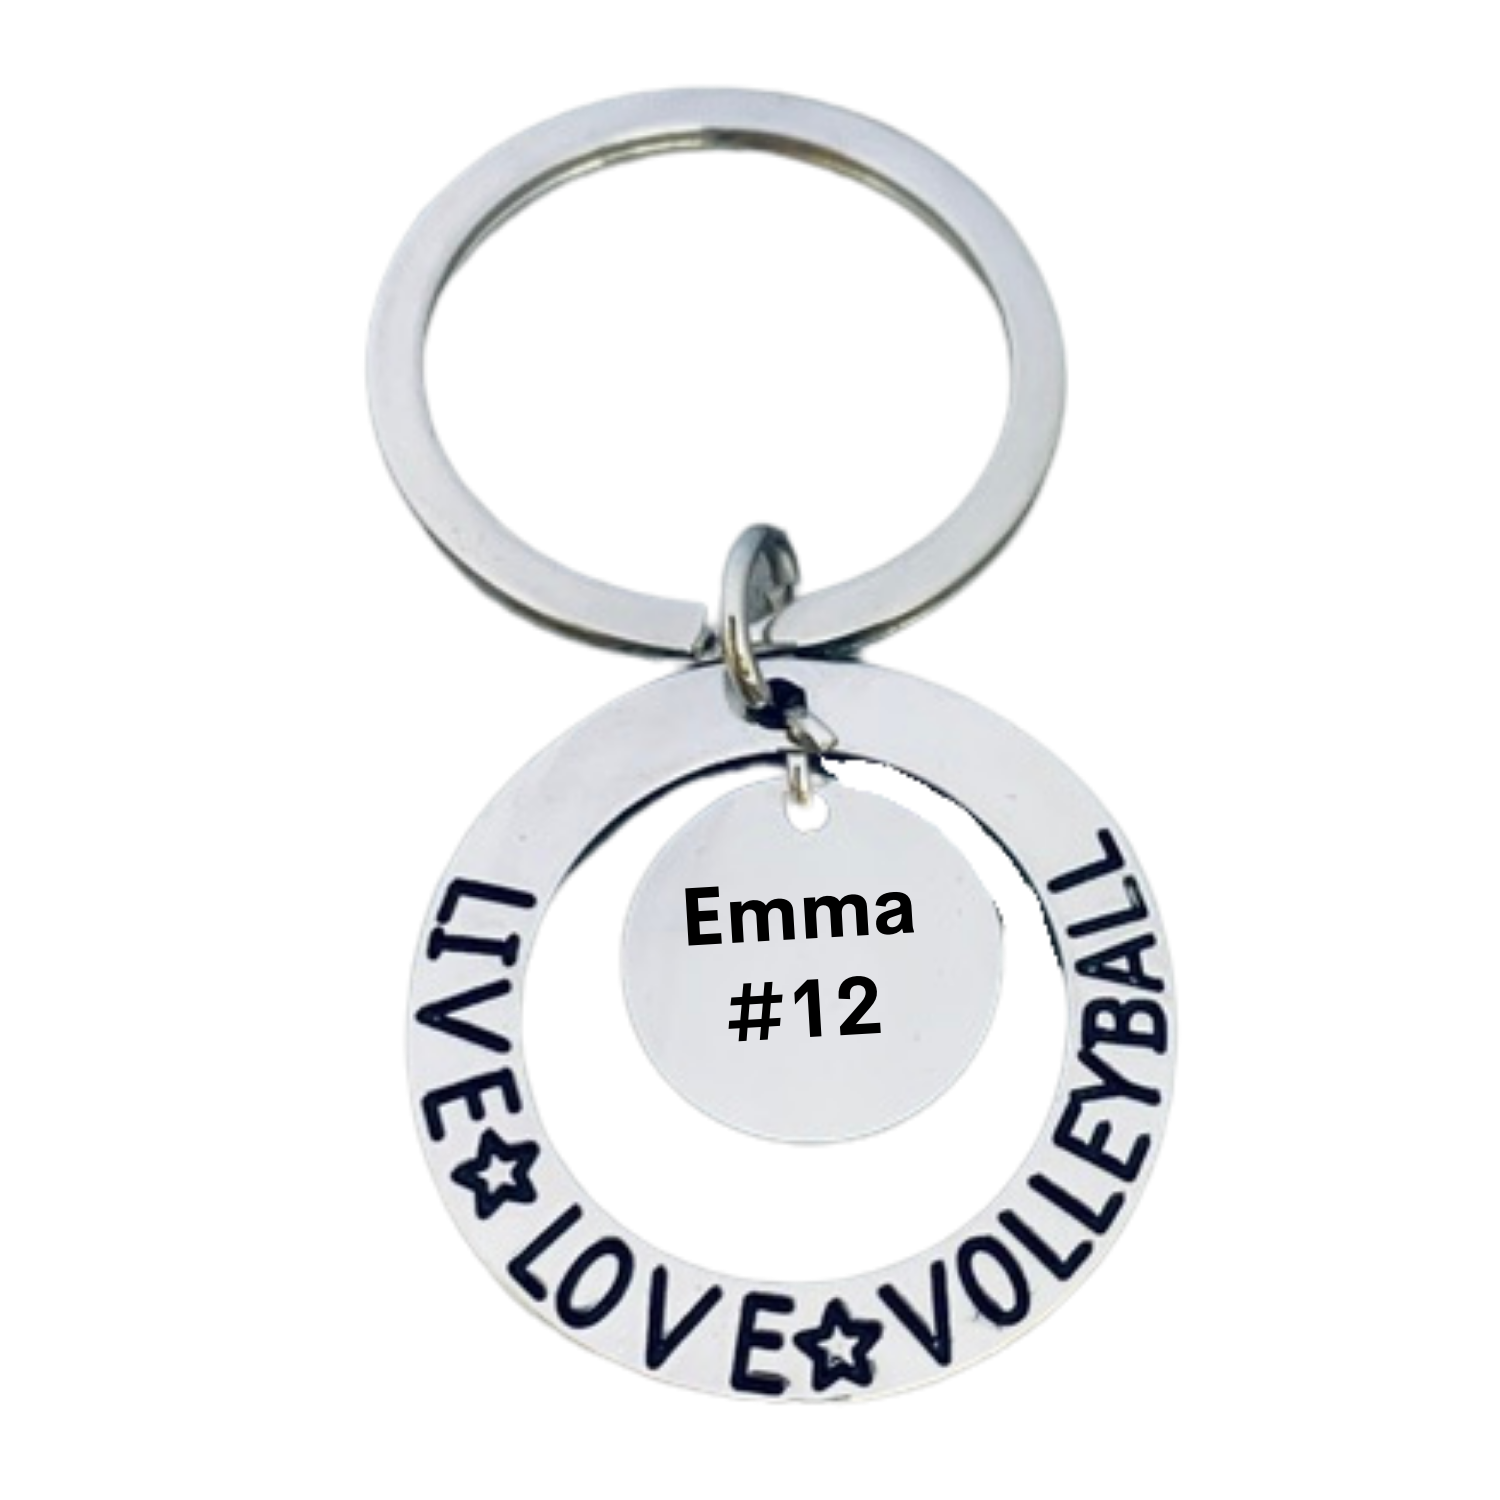 Volleyball Charm Round Keychain Perfect Gift with Choice of Engraving for Players